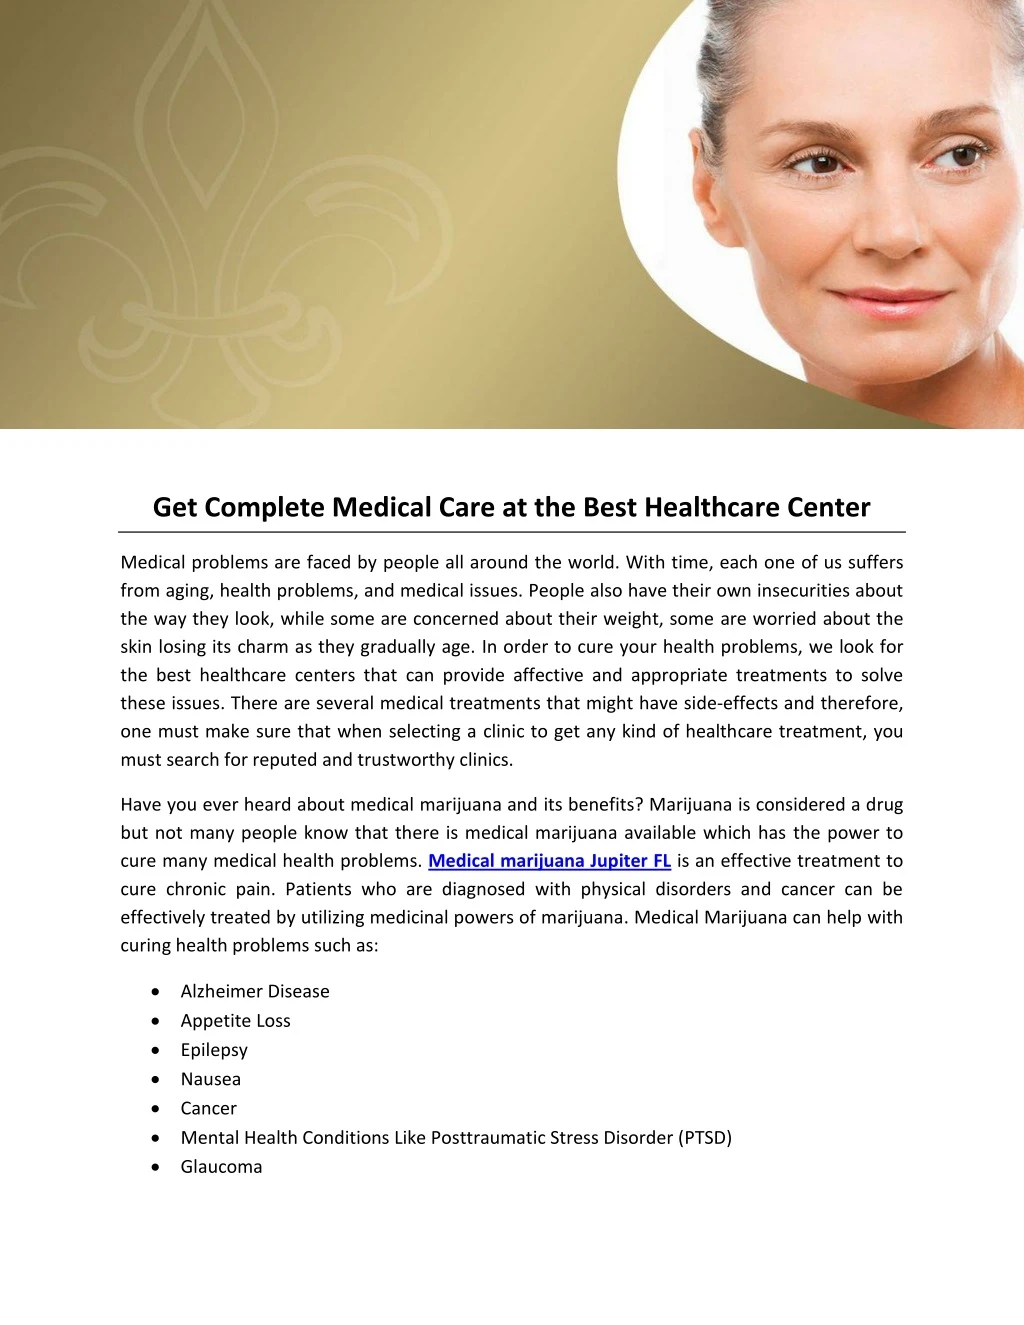 get complete medical care at the best healthcare